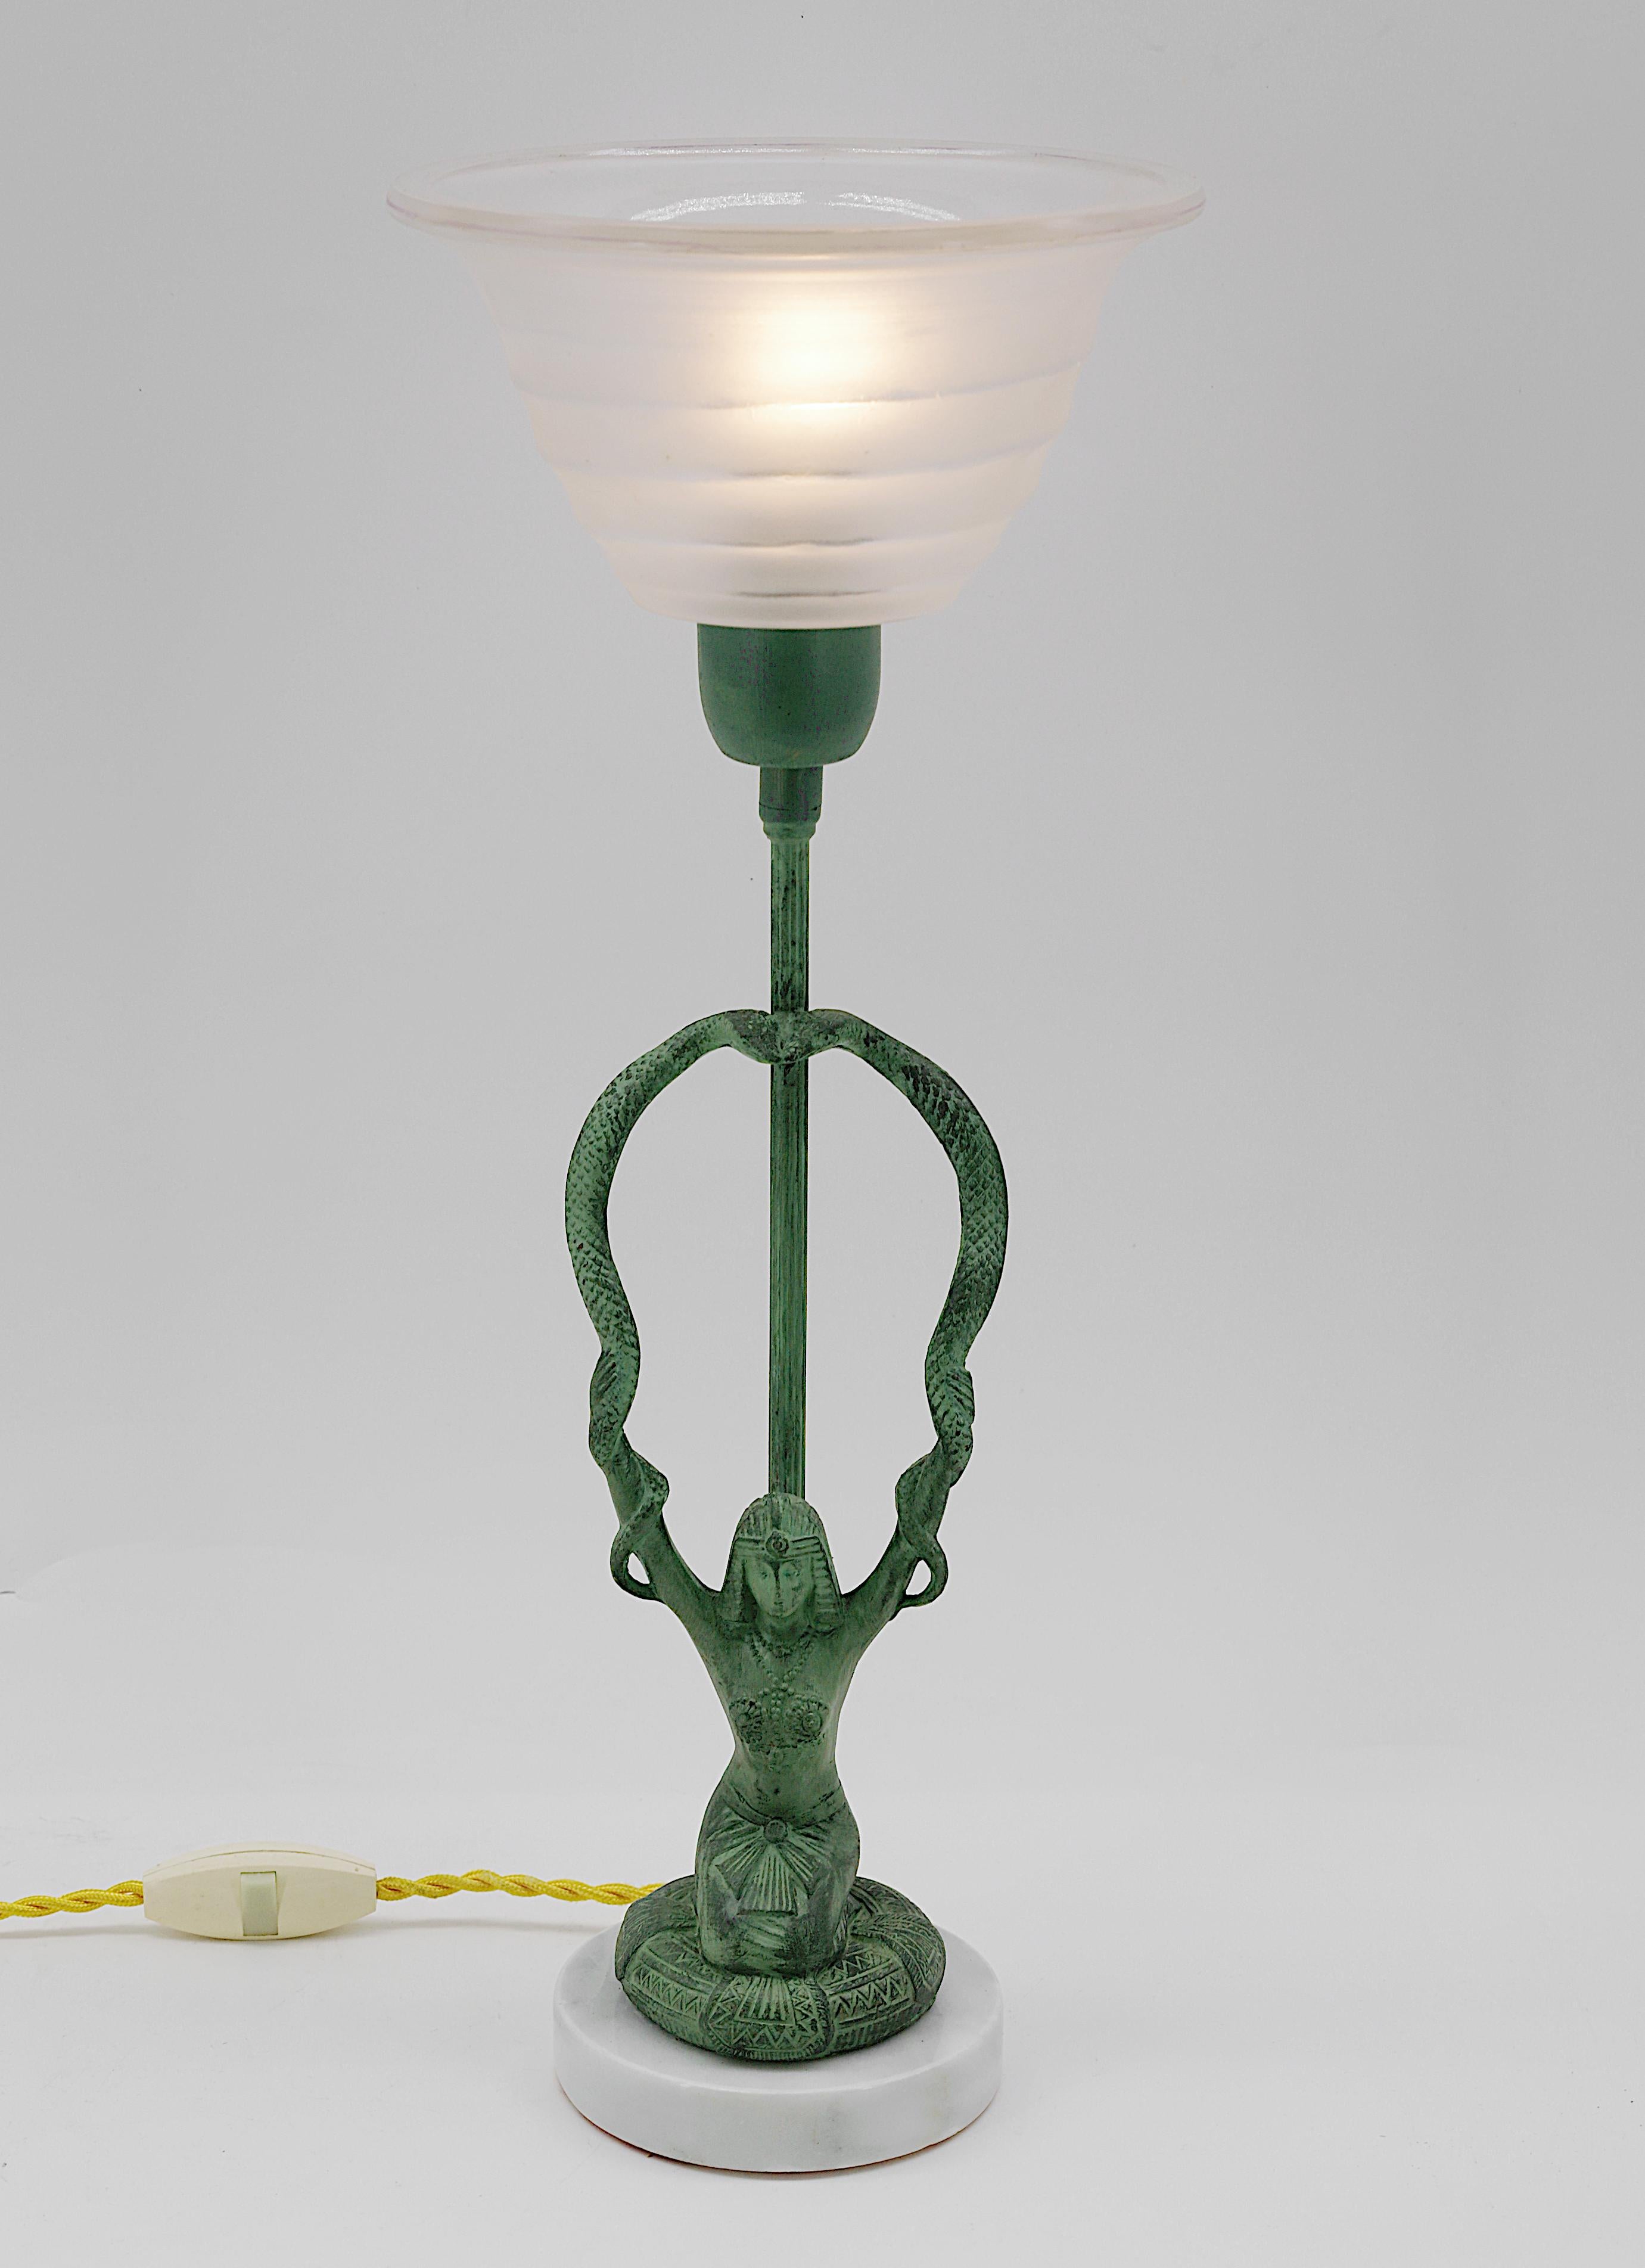 French Art Deco table amp, 1930s. Egyptian woman with snakes in her arms. Spelter, glass and marble. Glass shade by Georges Leleu (Paris). Height : 16